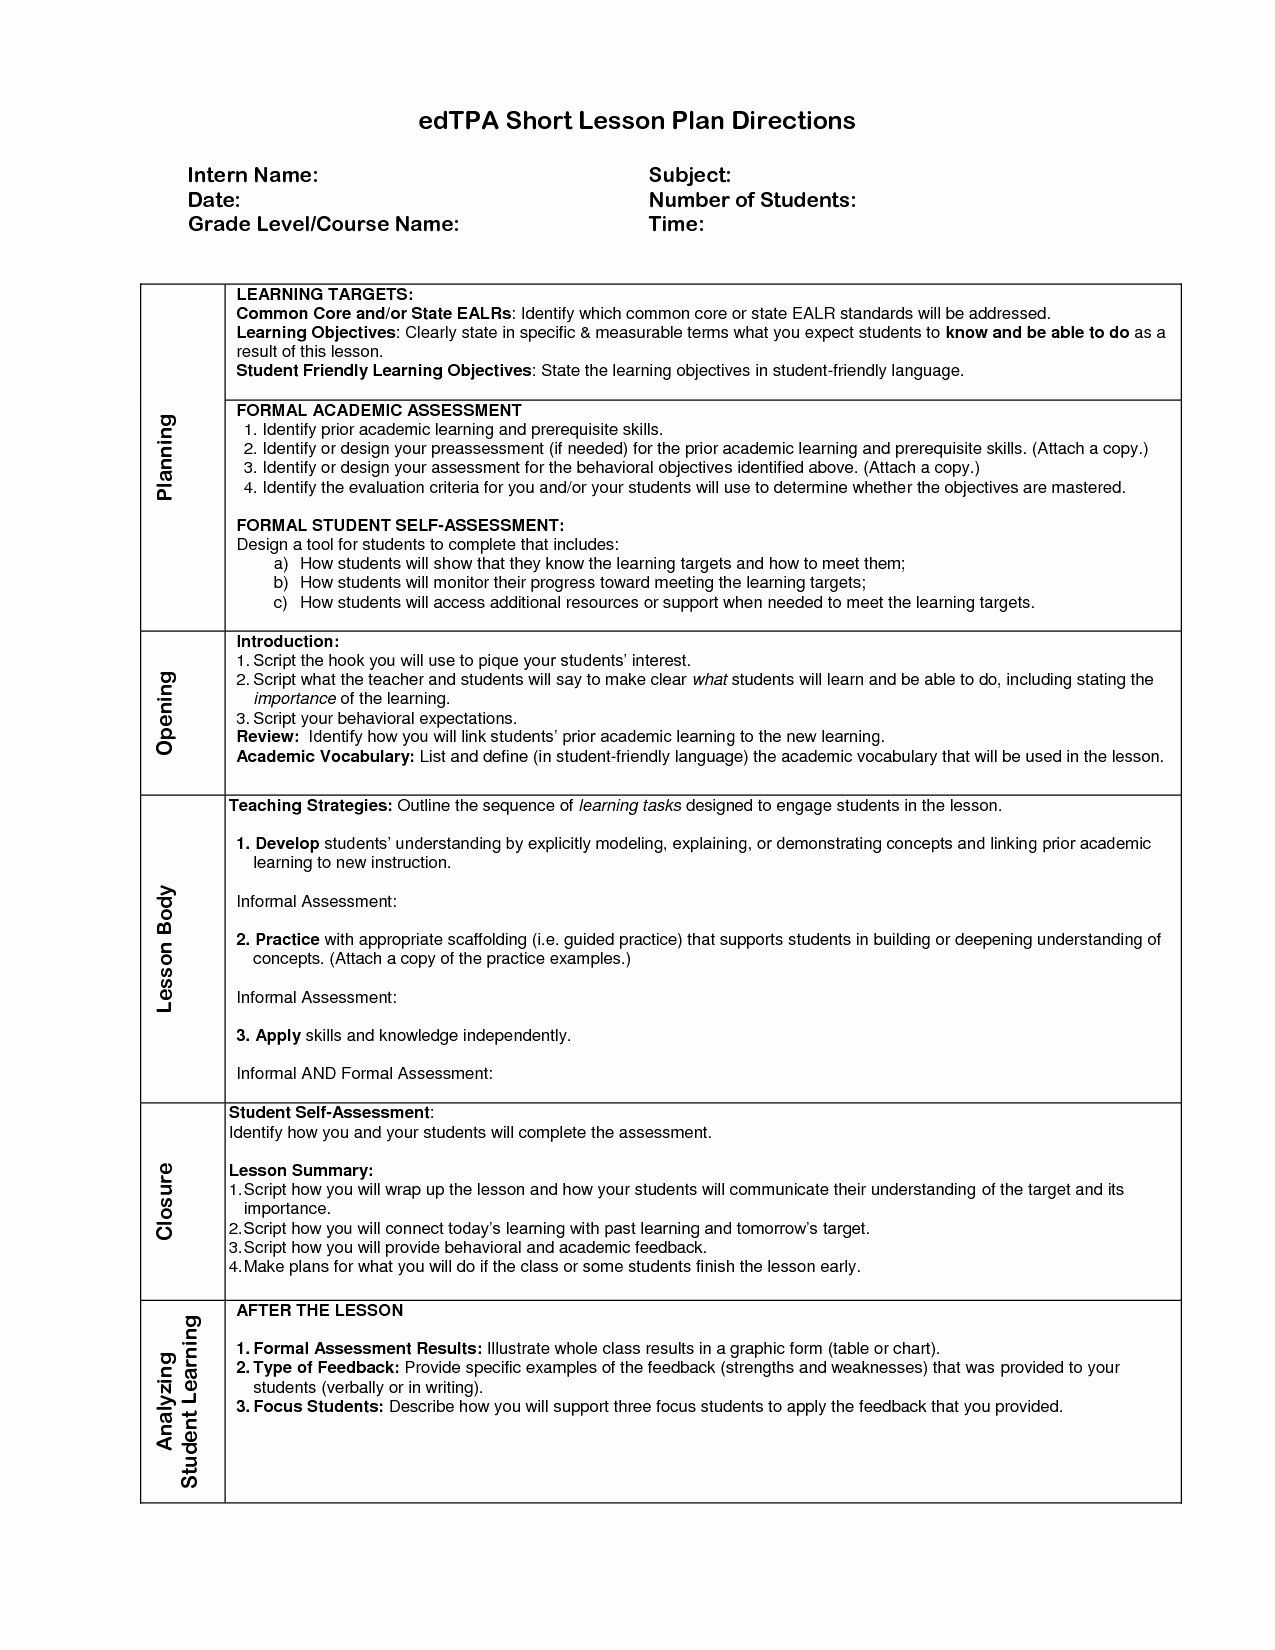 Lesson Plan Template Nyc Awesome Edtpa Lesson Plan Template Nyc Flowersheet